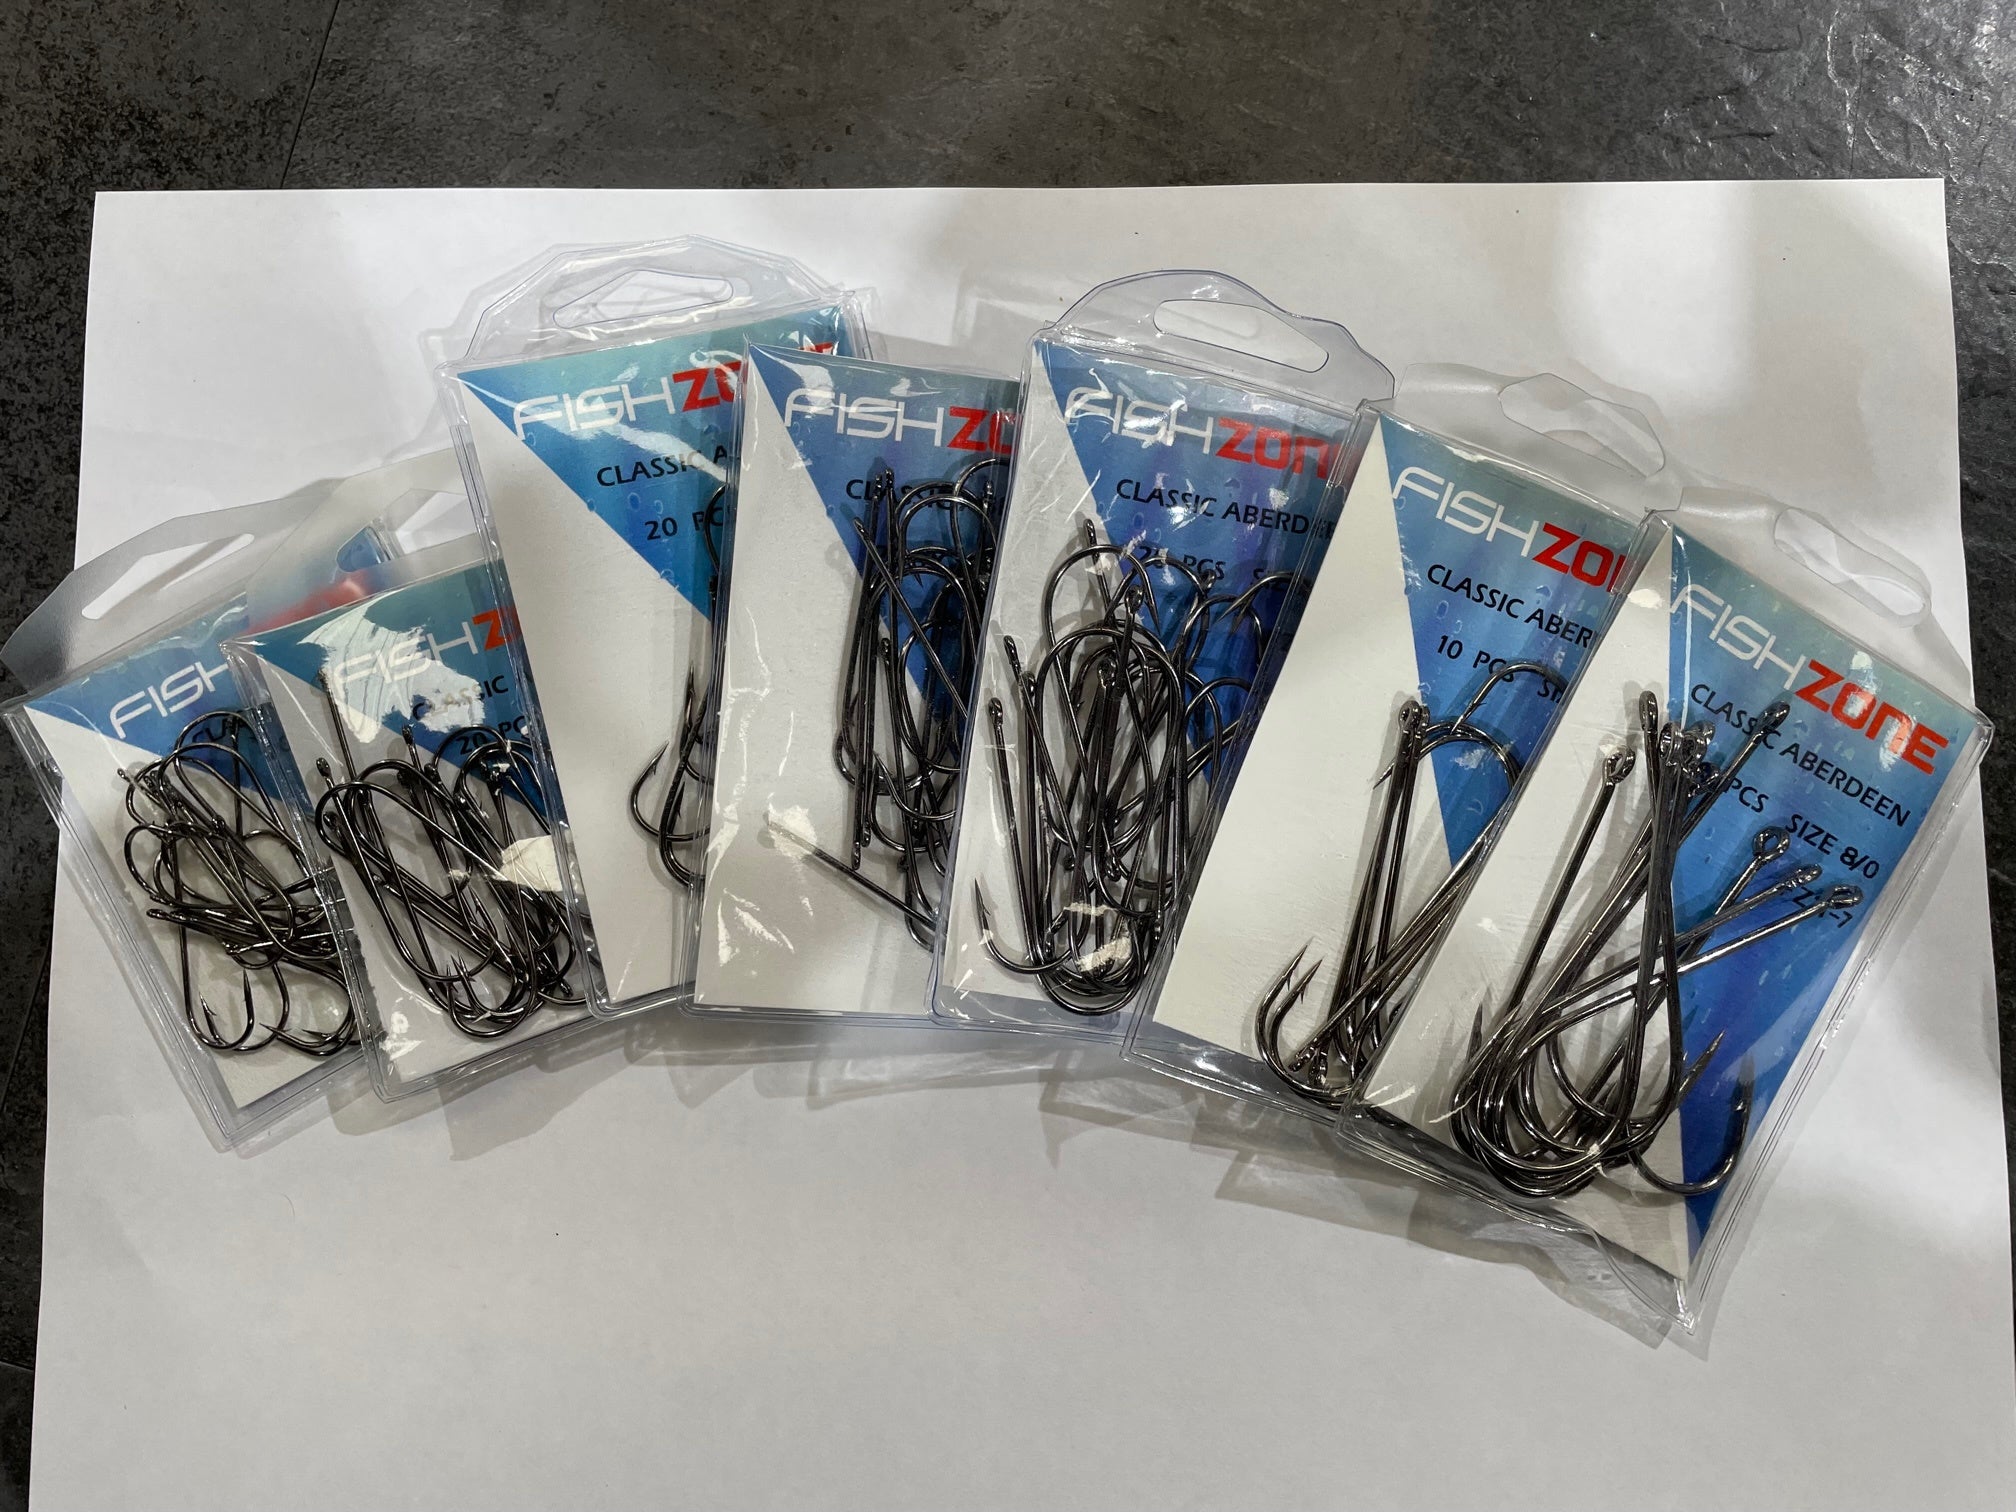 Fishzone Classic Aberdeen Black Nickel 20 Pack – Taskers Angling